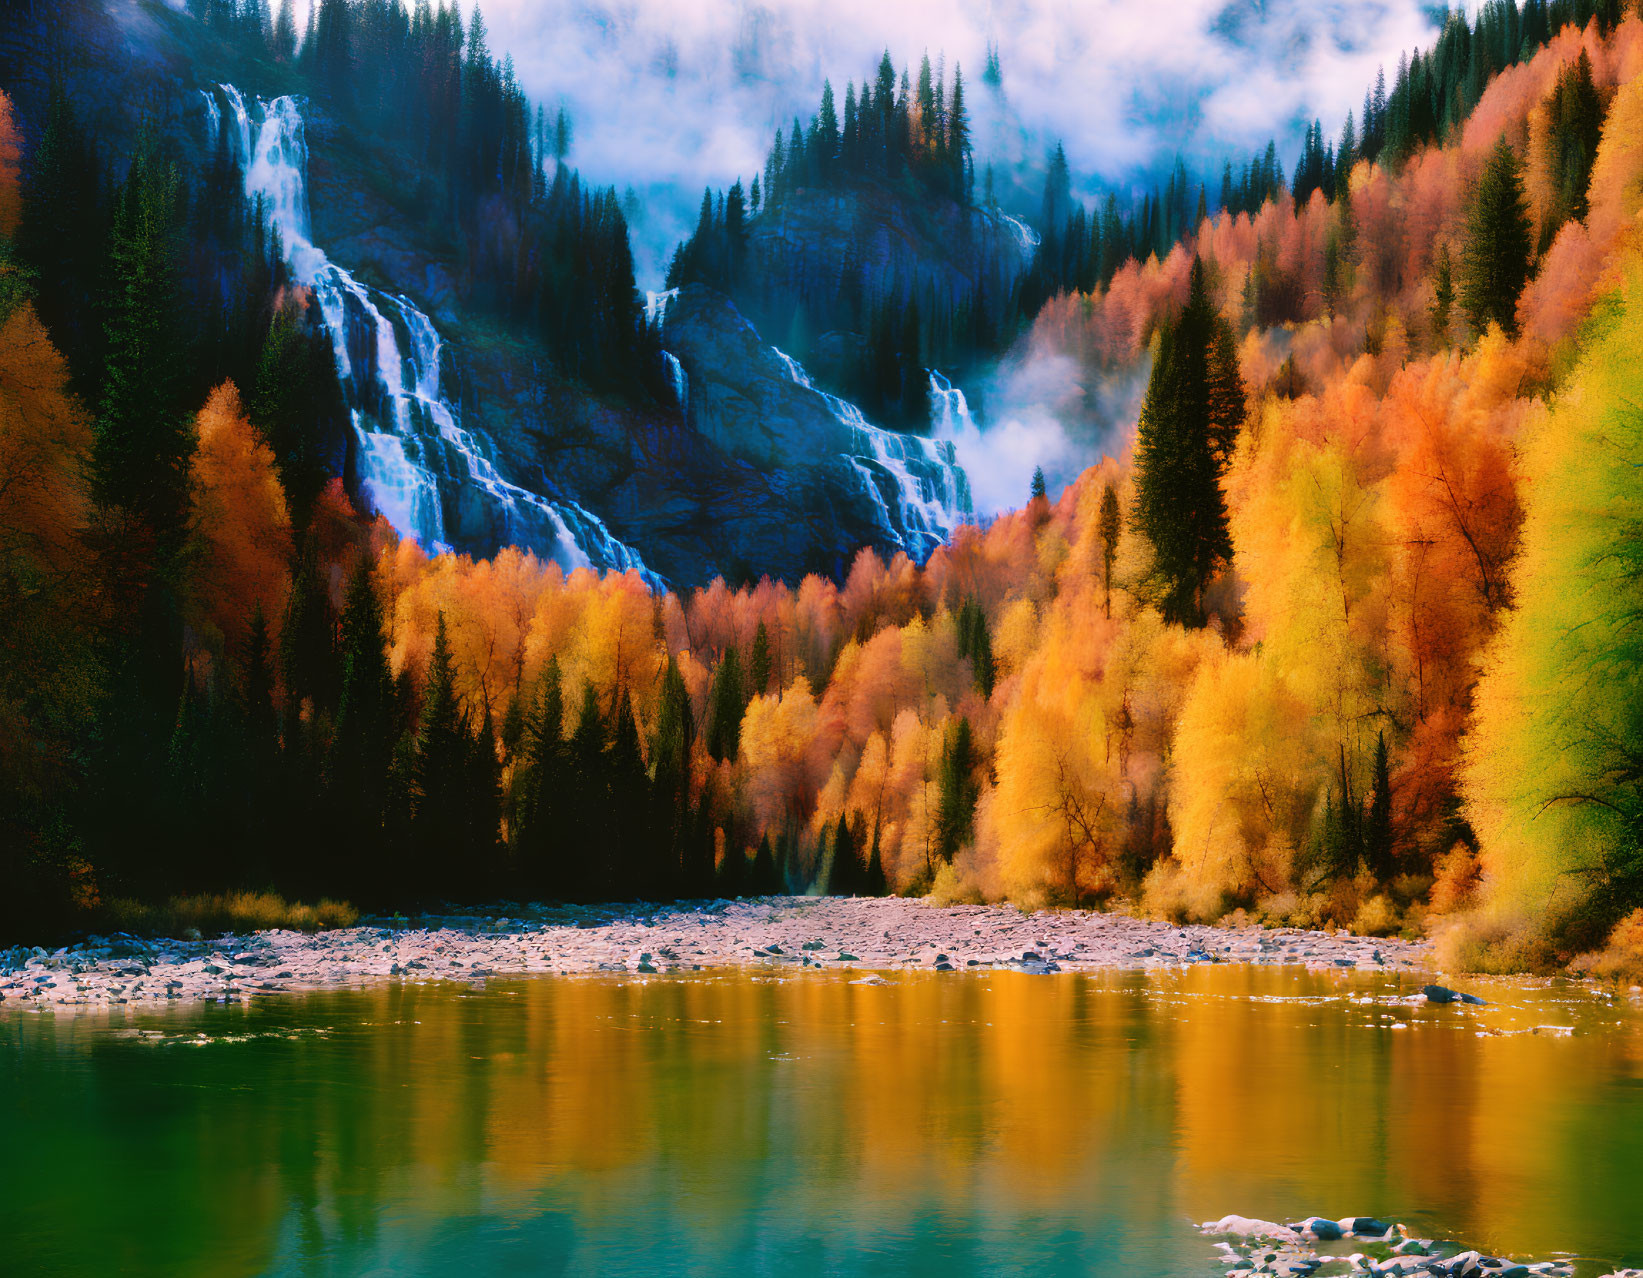 Autumn Foliage, River, Waterfall, Mountains, Sky - Scenic Nature Landscape